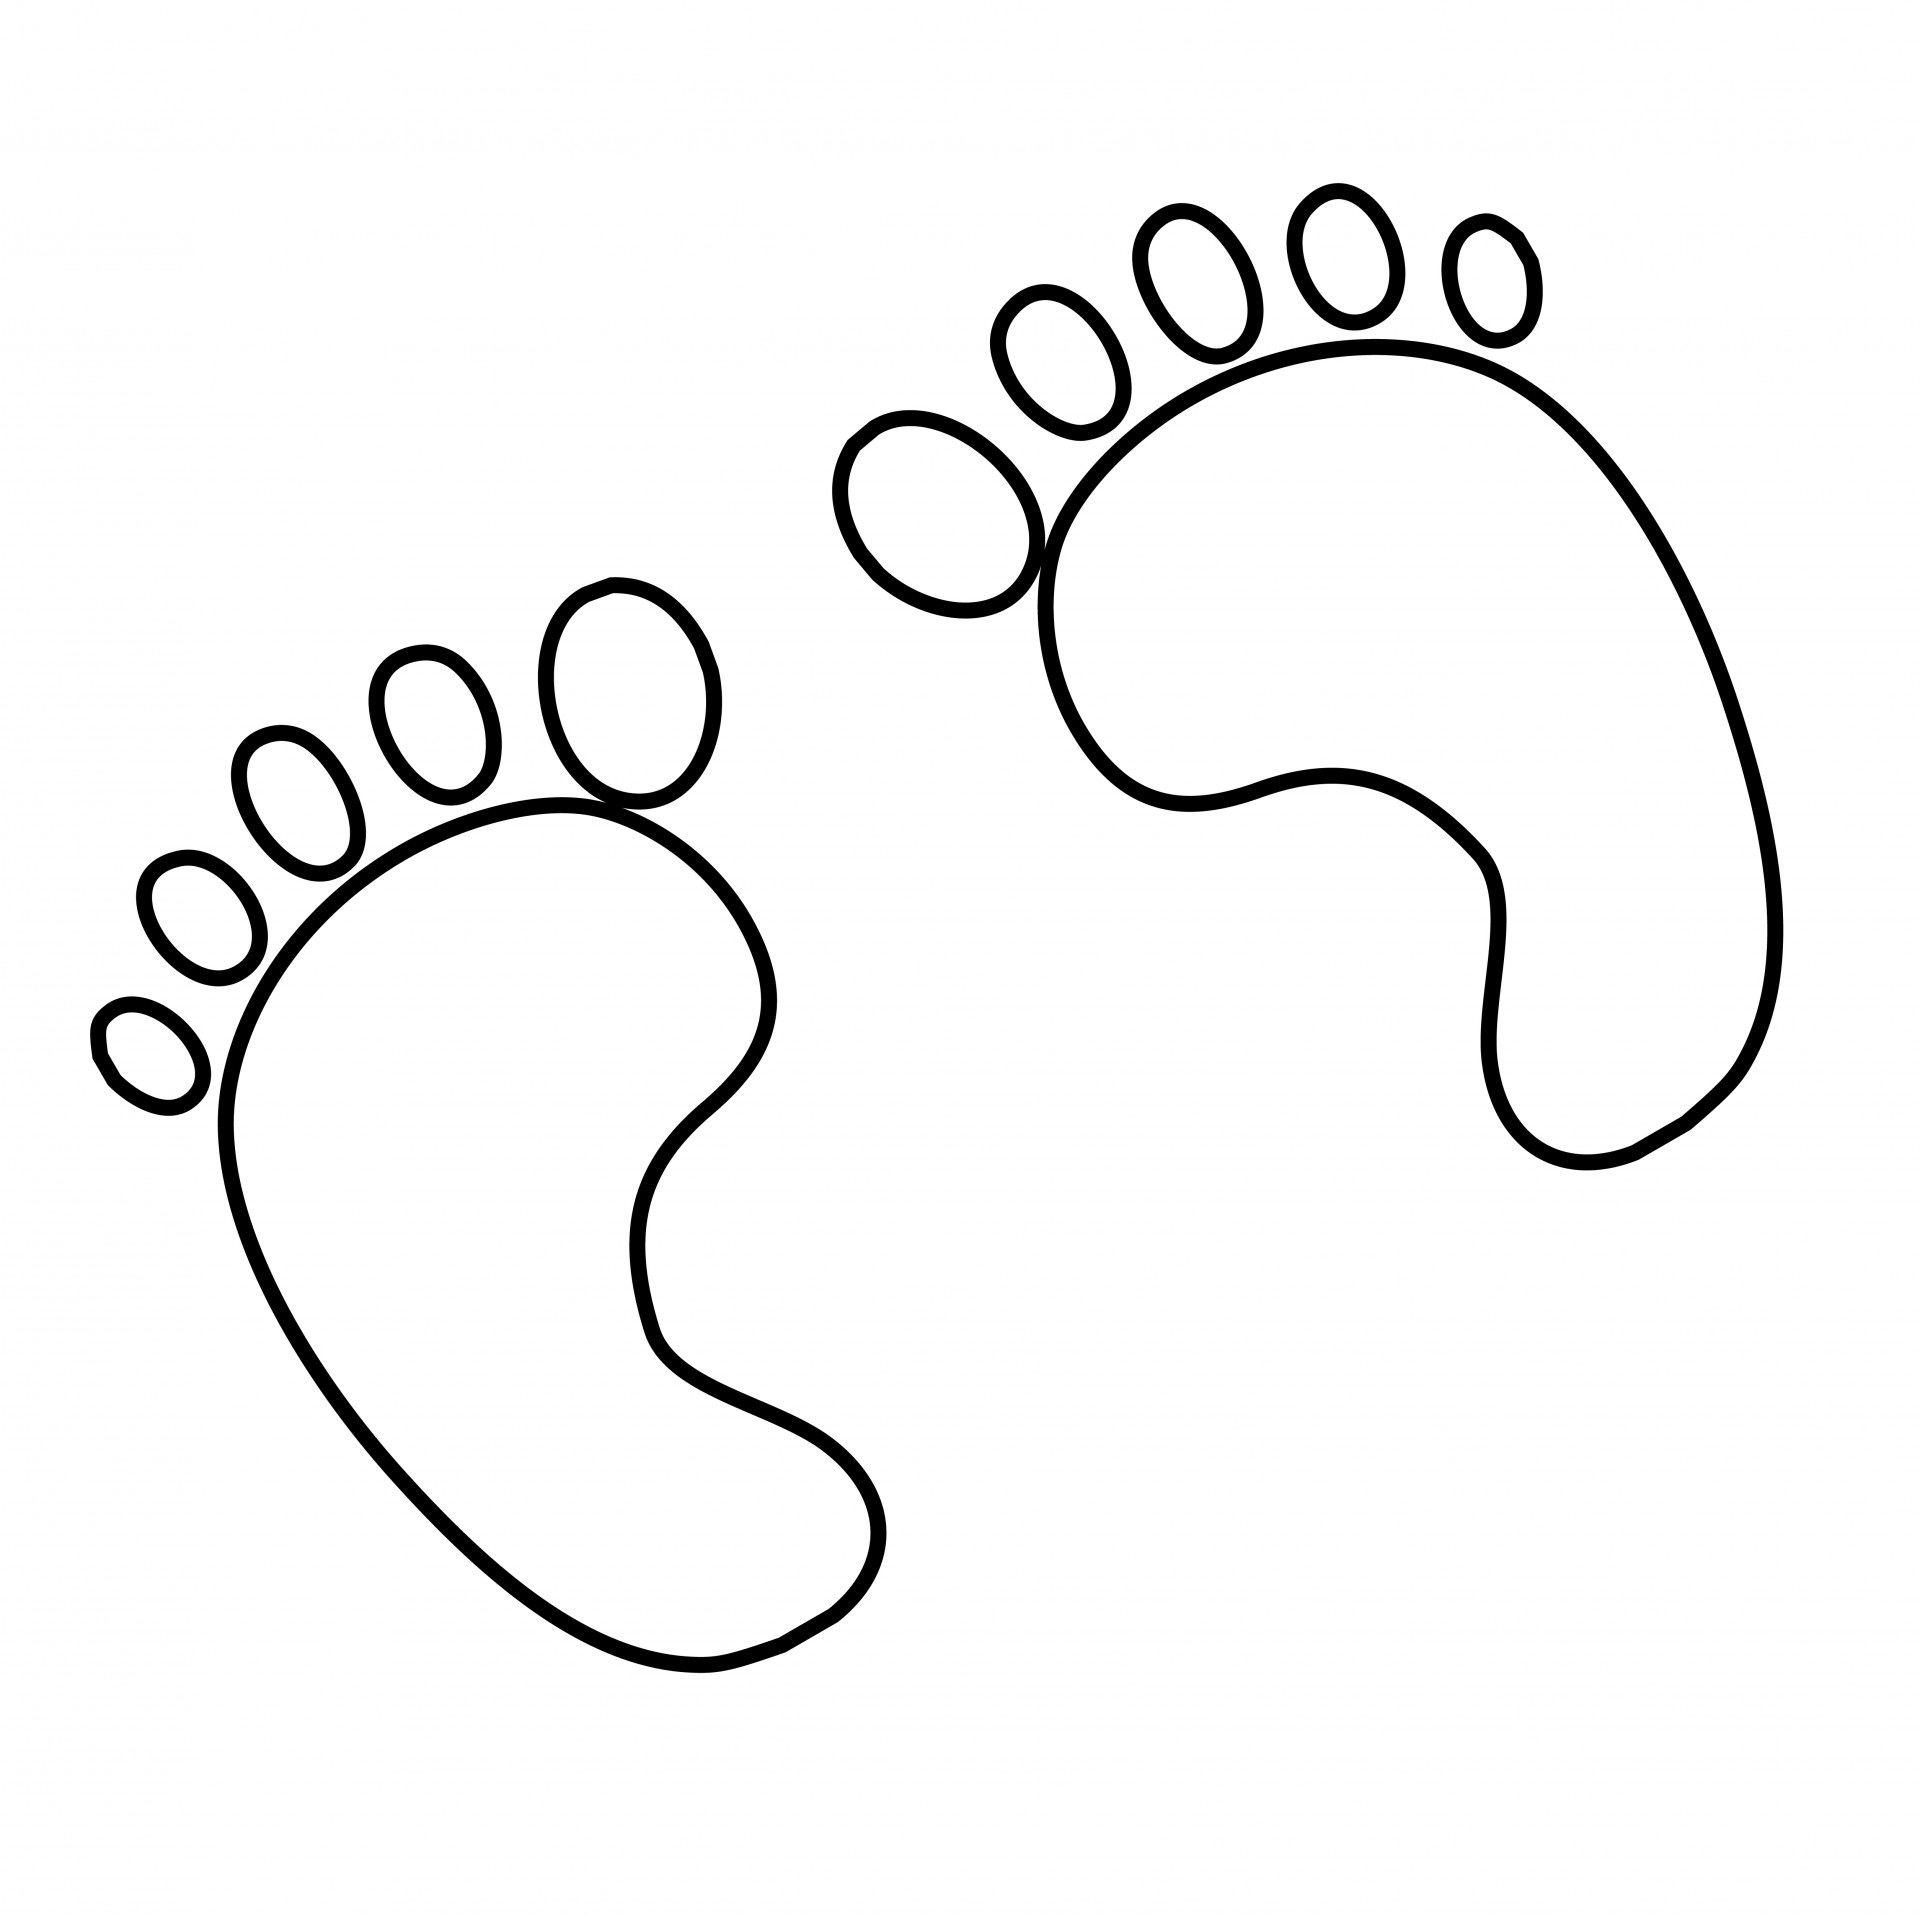 Baby Feet Clipart Black And White.